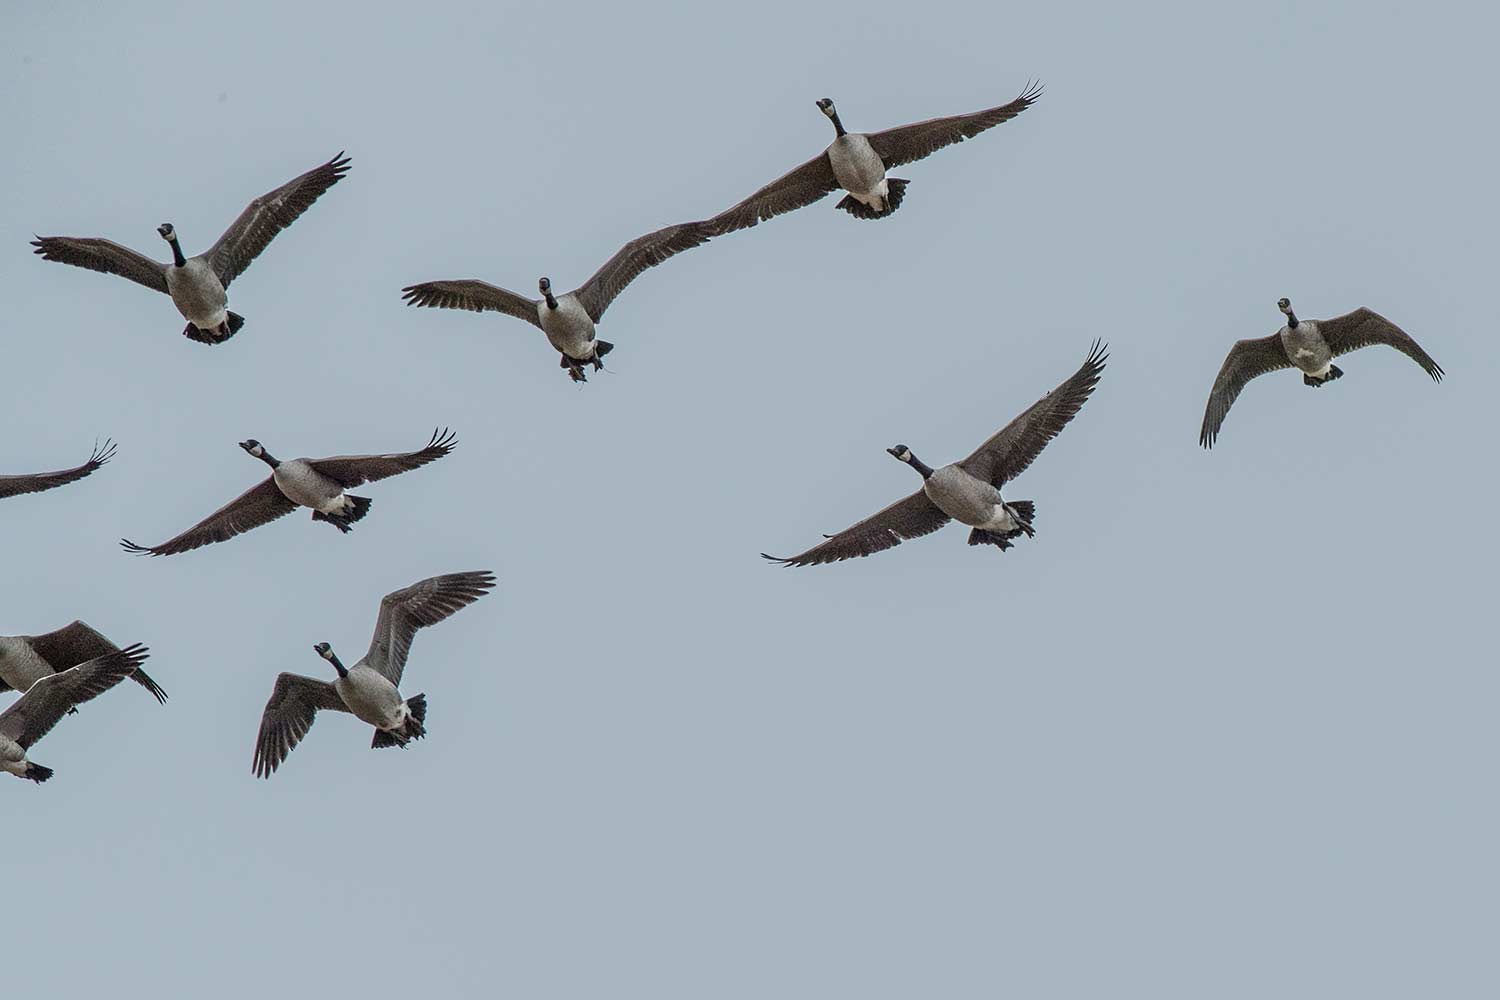 A flock of Canada geese flying through the air.